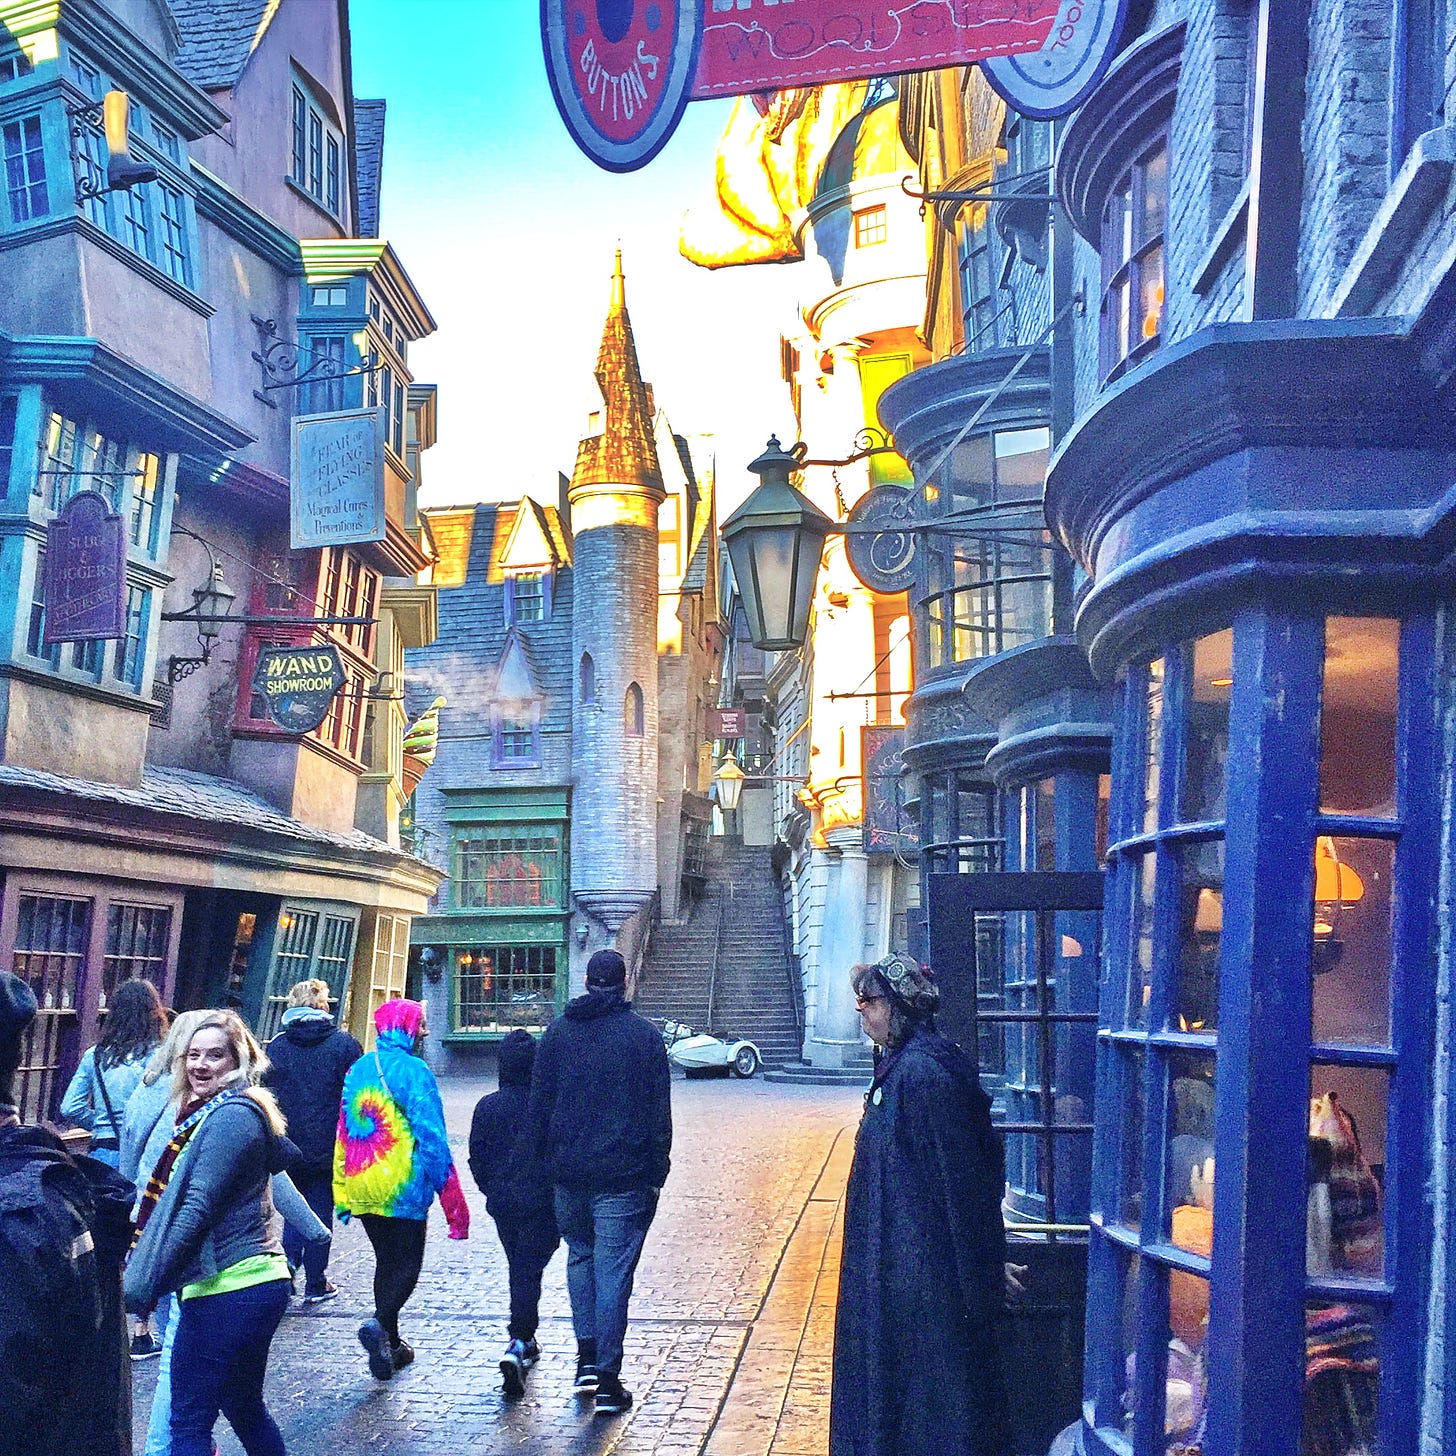 Early admission in Diagon Alley at Universal Orlando